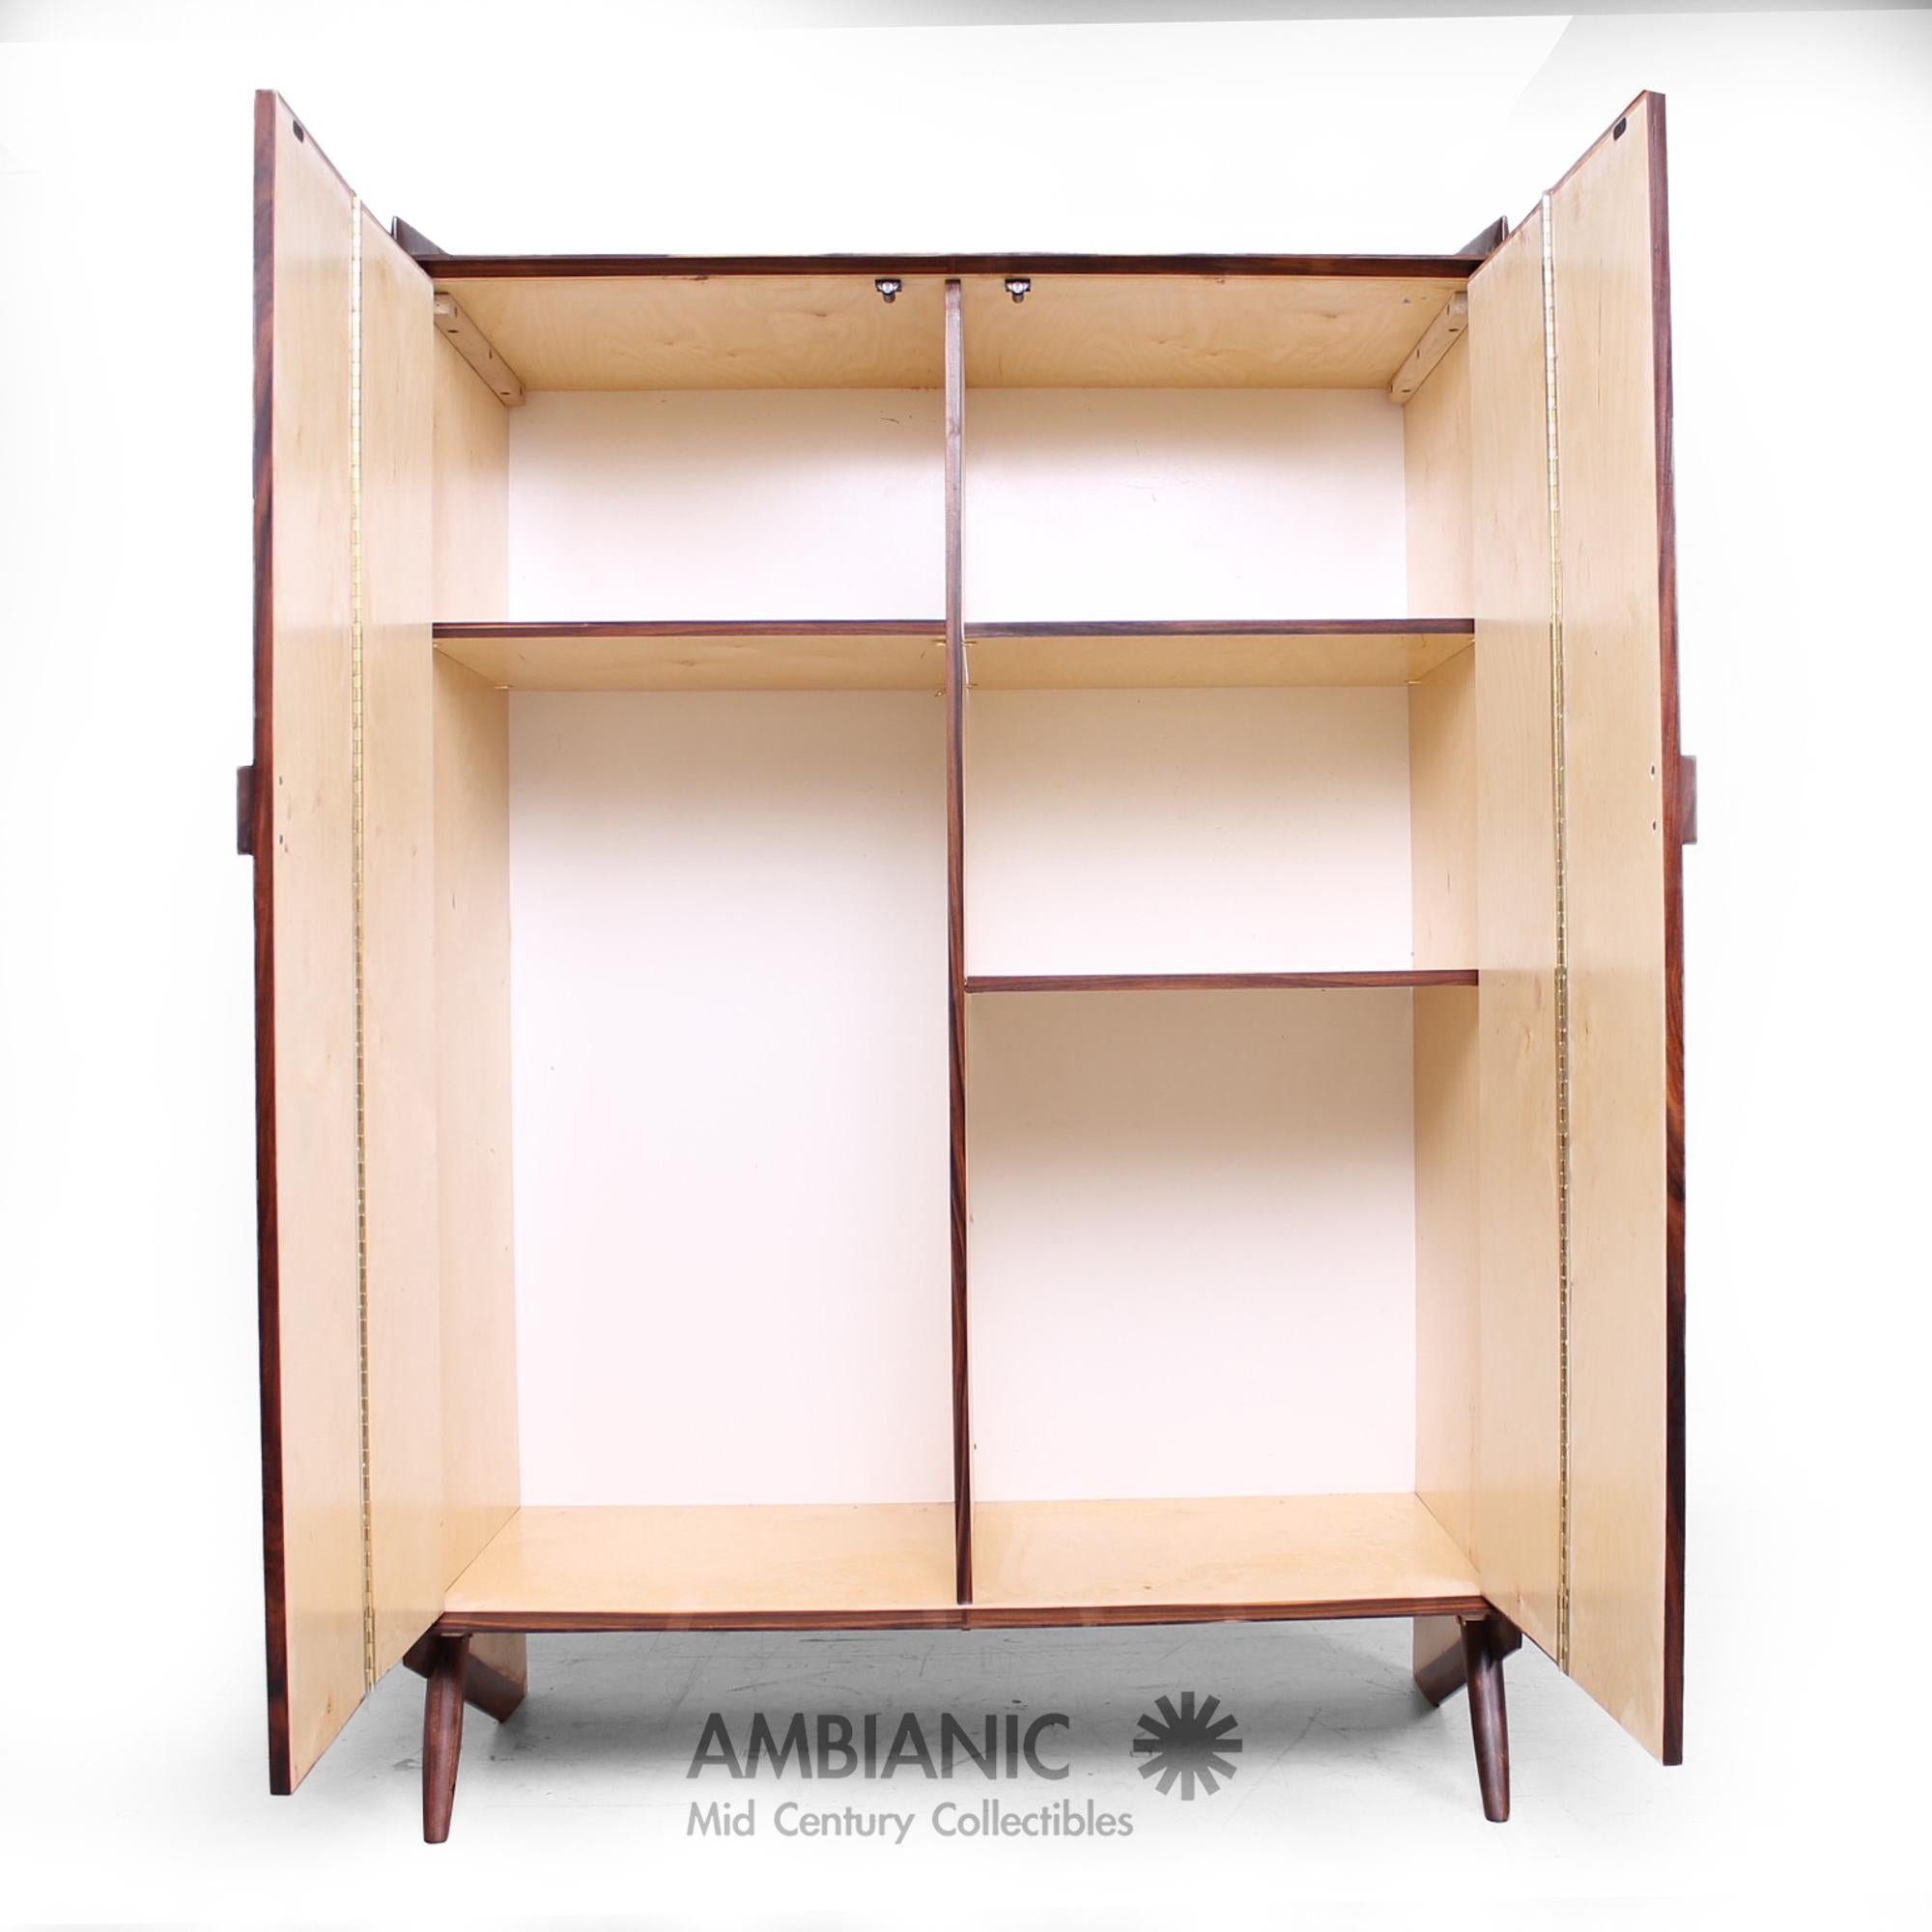 An exquisite custom rosewood armoire gentleman's cabinet
Fabulous wood grain beauty!
New production designed by Pablo Romo for AMBIANIC, 2016.
Features an open storage with adjustable shelves. Pegs legs at a skewed angle with unique